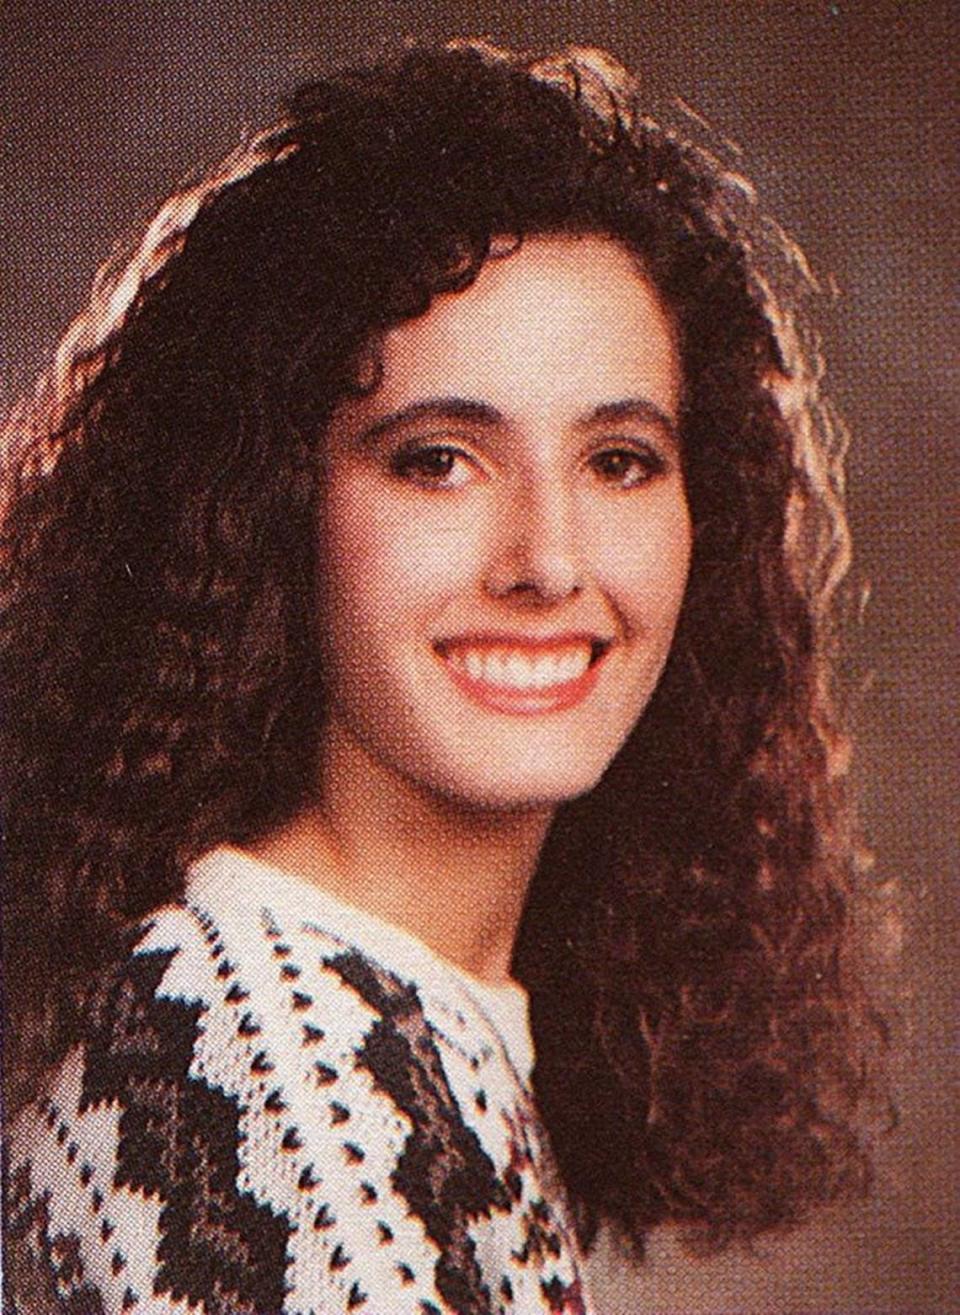 Debbie Dorian is seen in a photo provided by her family in 1996. Dorian was found raped and murdered in her northeast Fresno apartment in August 1996.